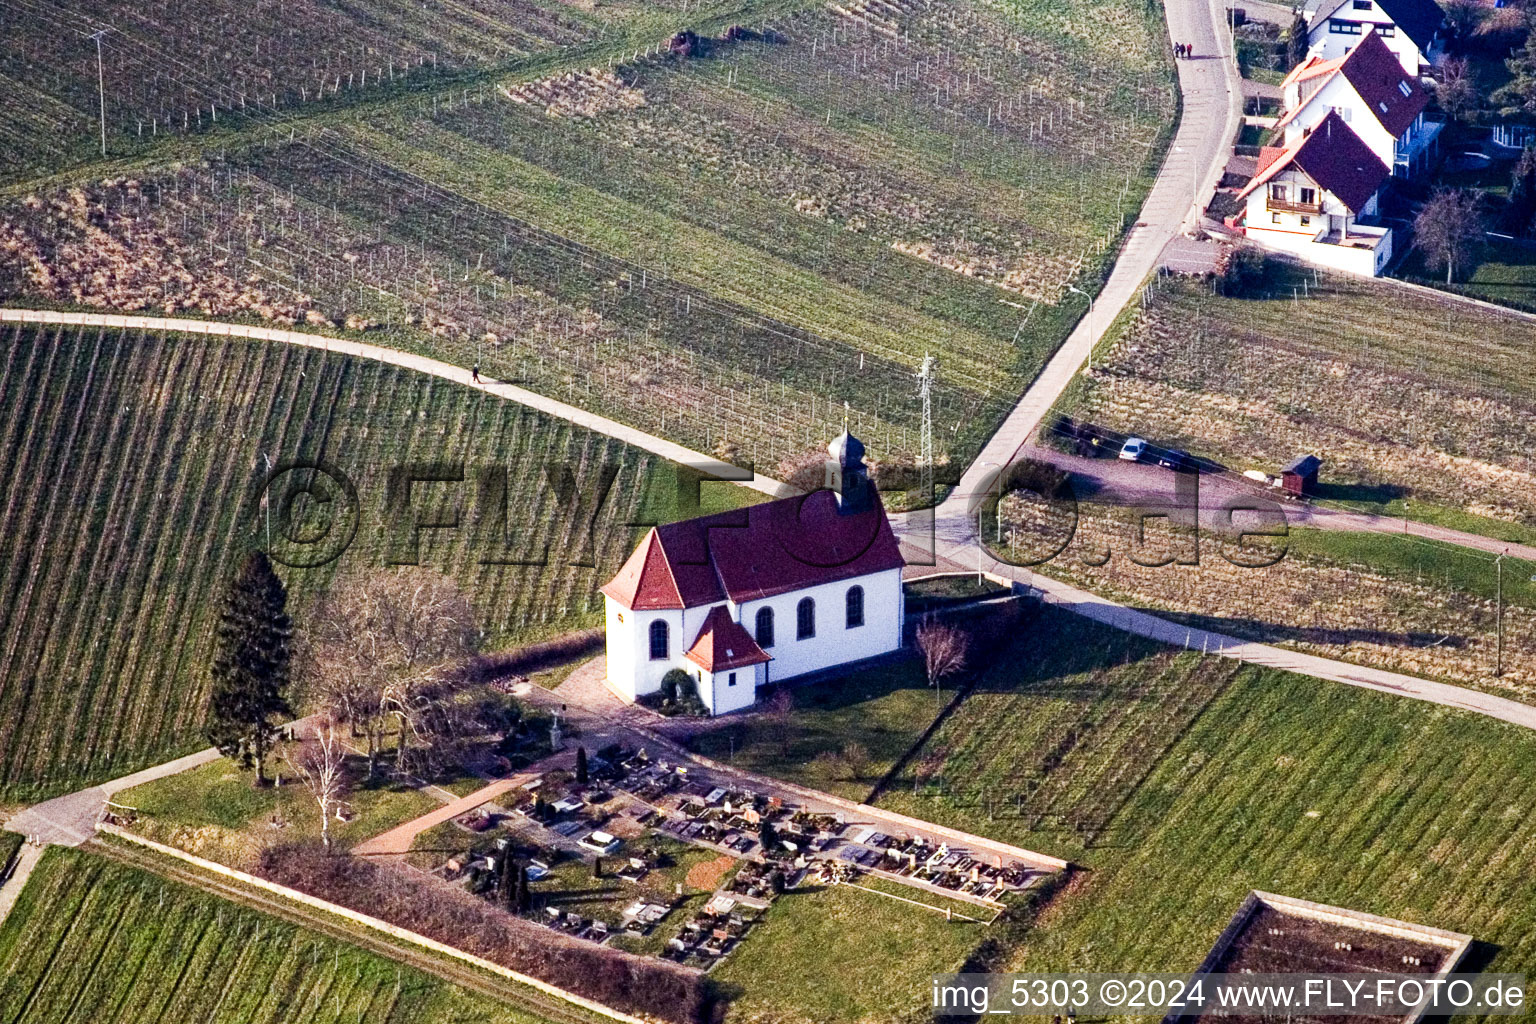 Churches building the chapel Dionysius and grave-yard in the wine-yards near the district Gleishorbach in Gleiszellen-Gleishorbach in the state Rhineland-Palatinate